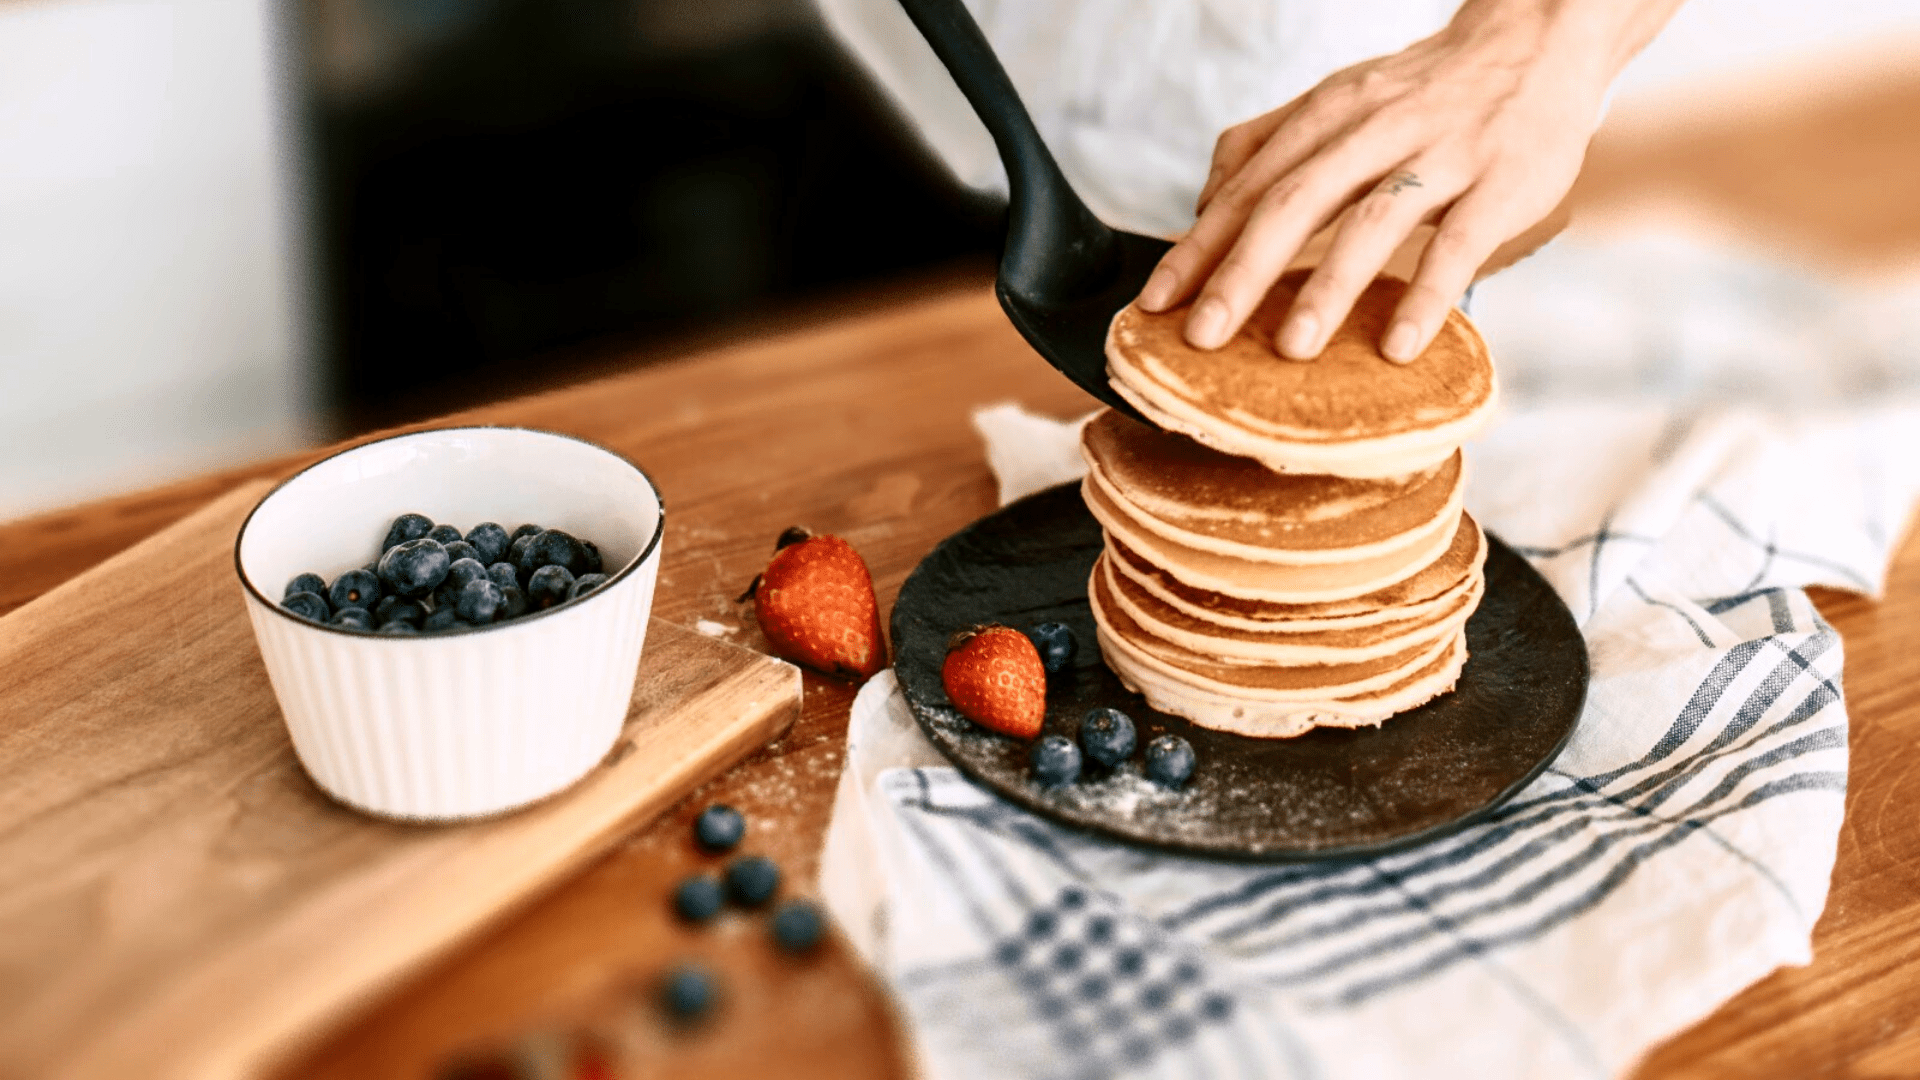 Best spatula for pancakes | Top 5 for turning & flipping like a pro